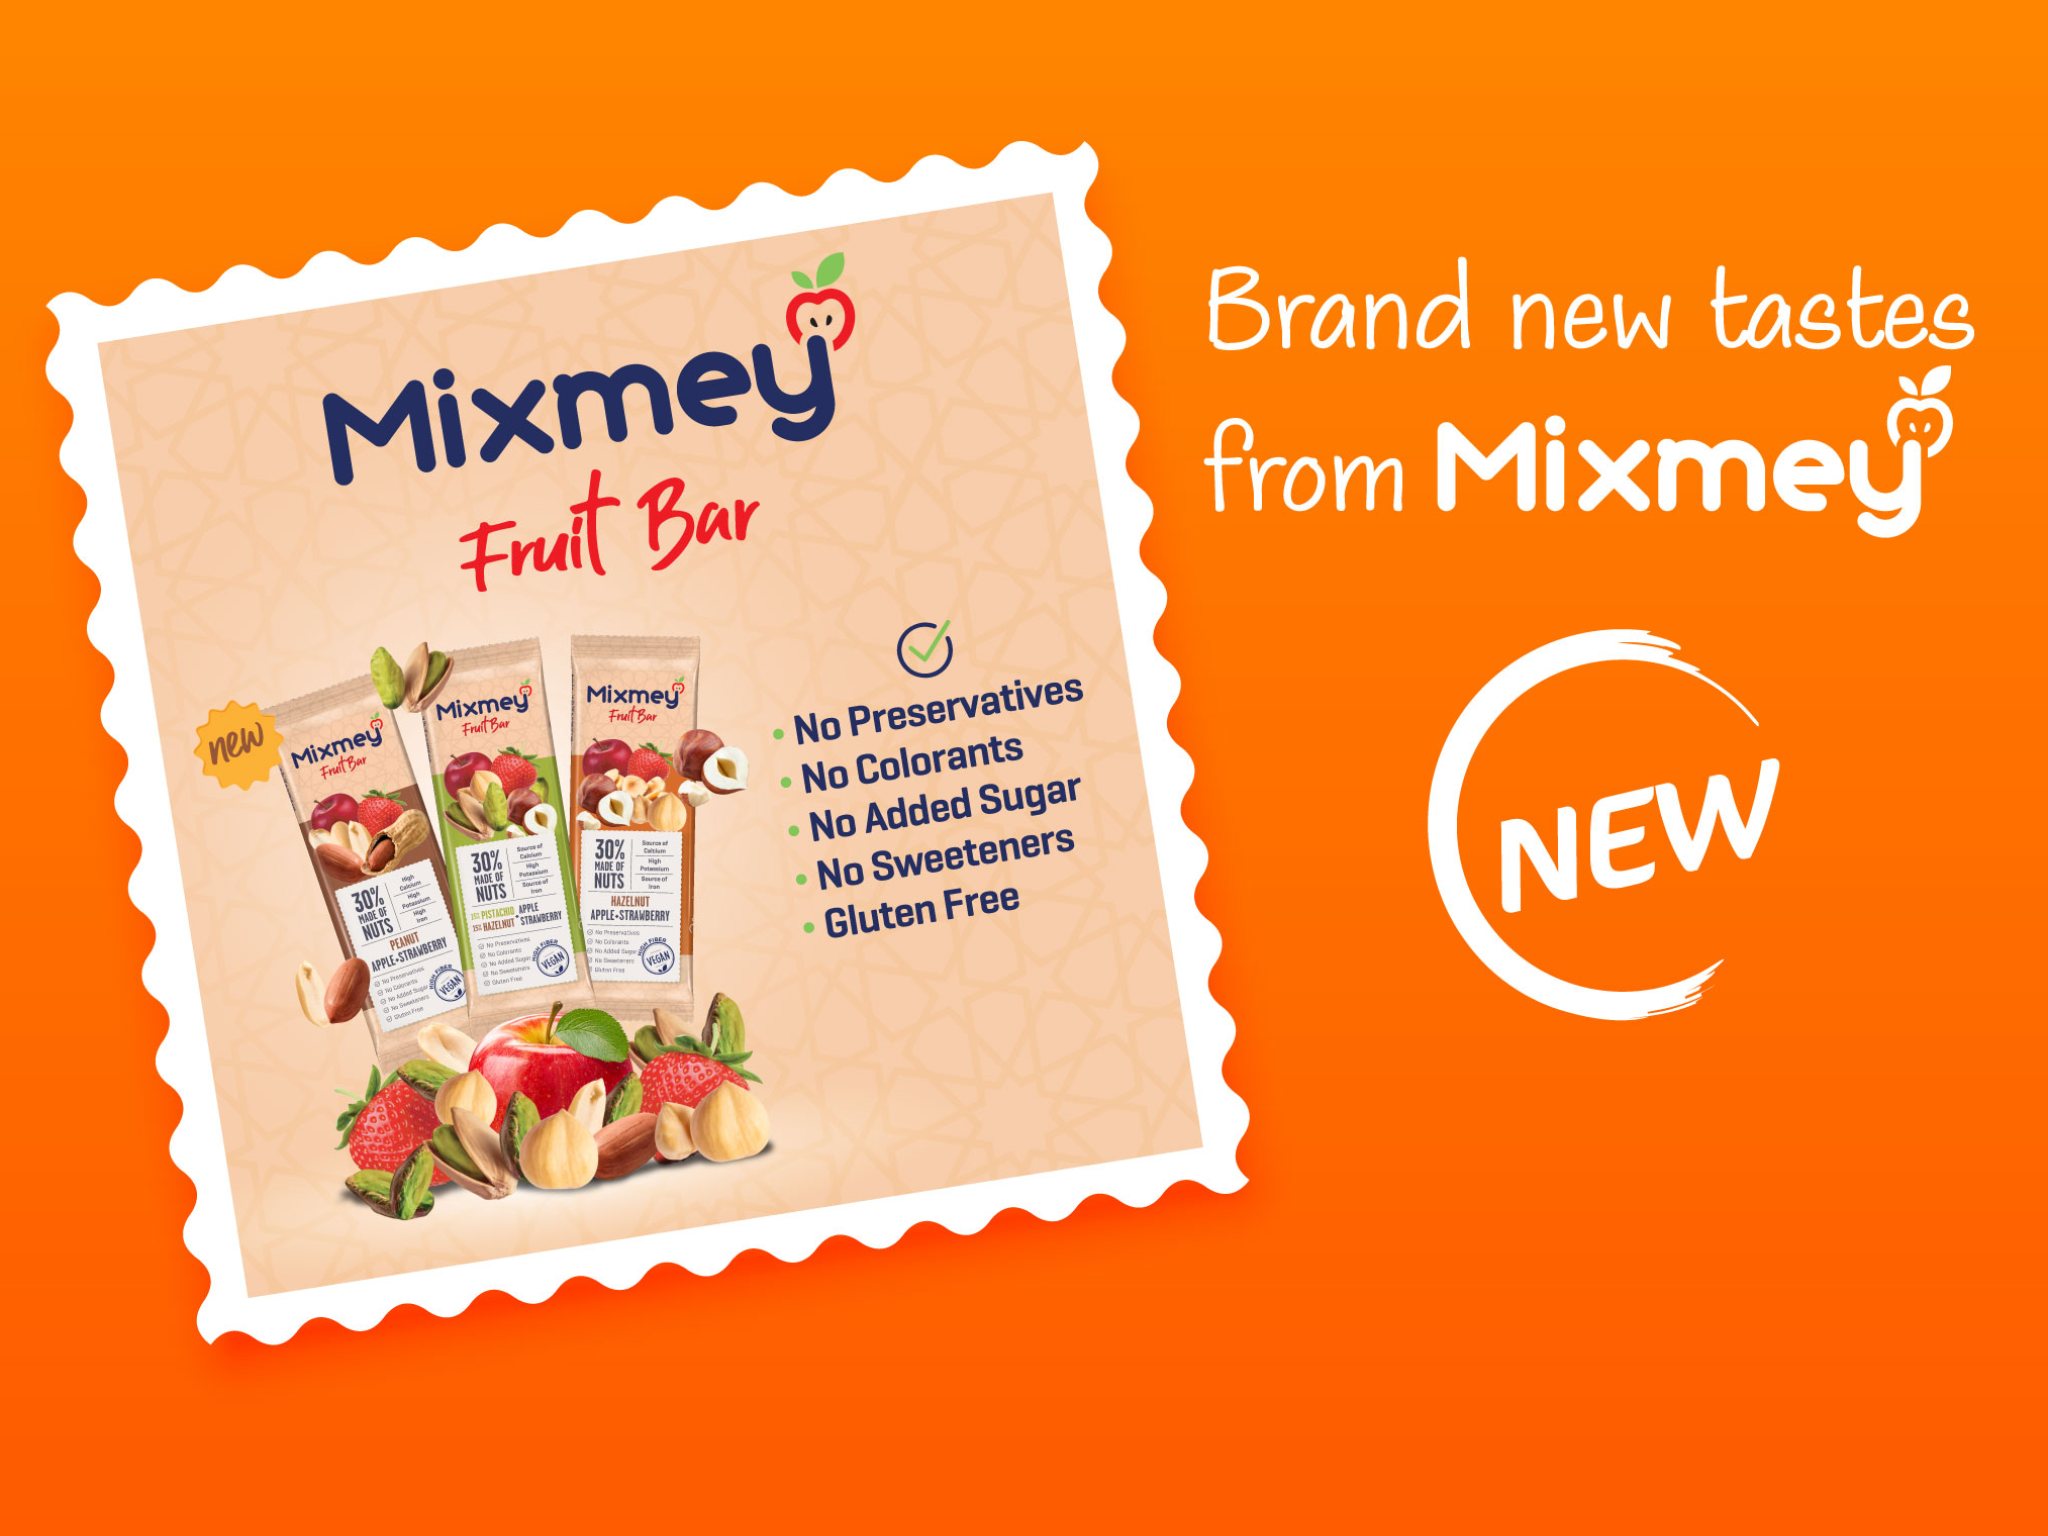 New products from MIXMEY